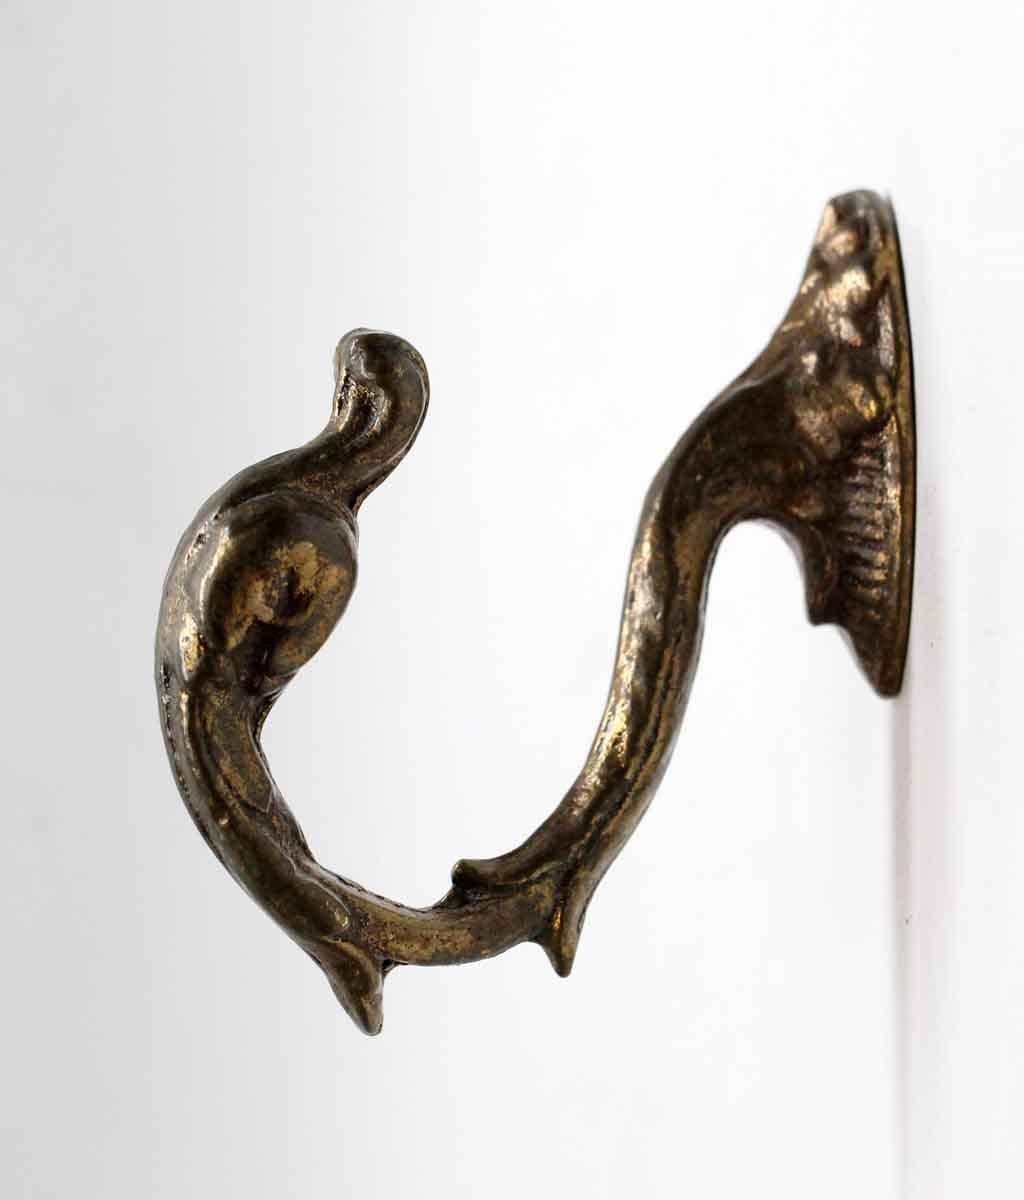 Mid-20th century bronze curtain tie back or hook in the shape of a swan. From the famous Waldorf Astoria in New York City on Park Ave in Manhattan. Takes one hanger bolt to install (not included ). Waldorf Astoria authenticity card included with